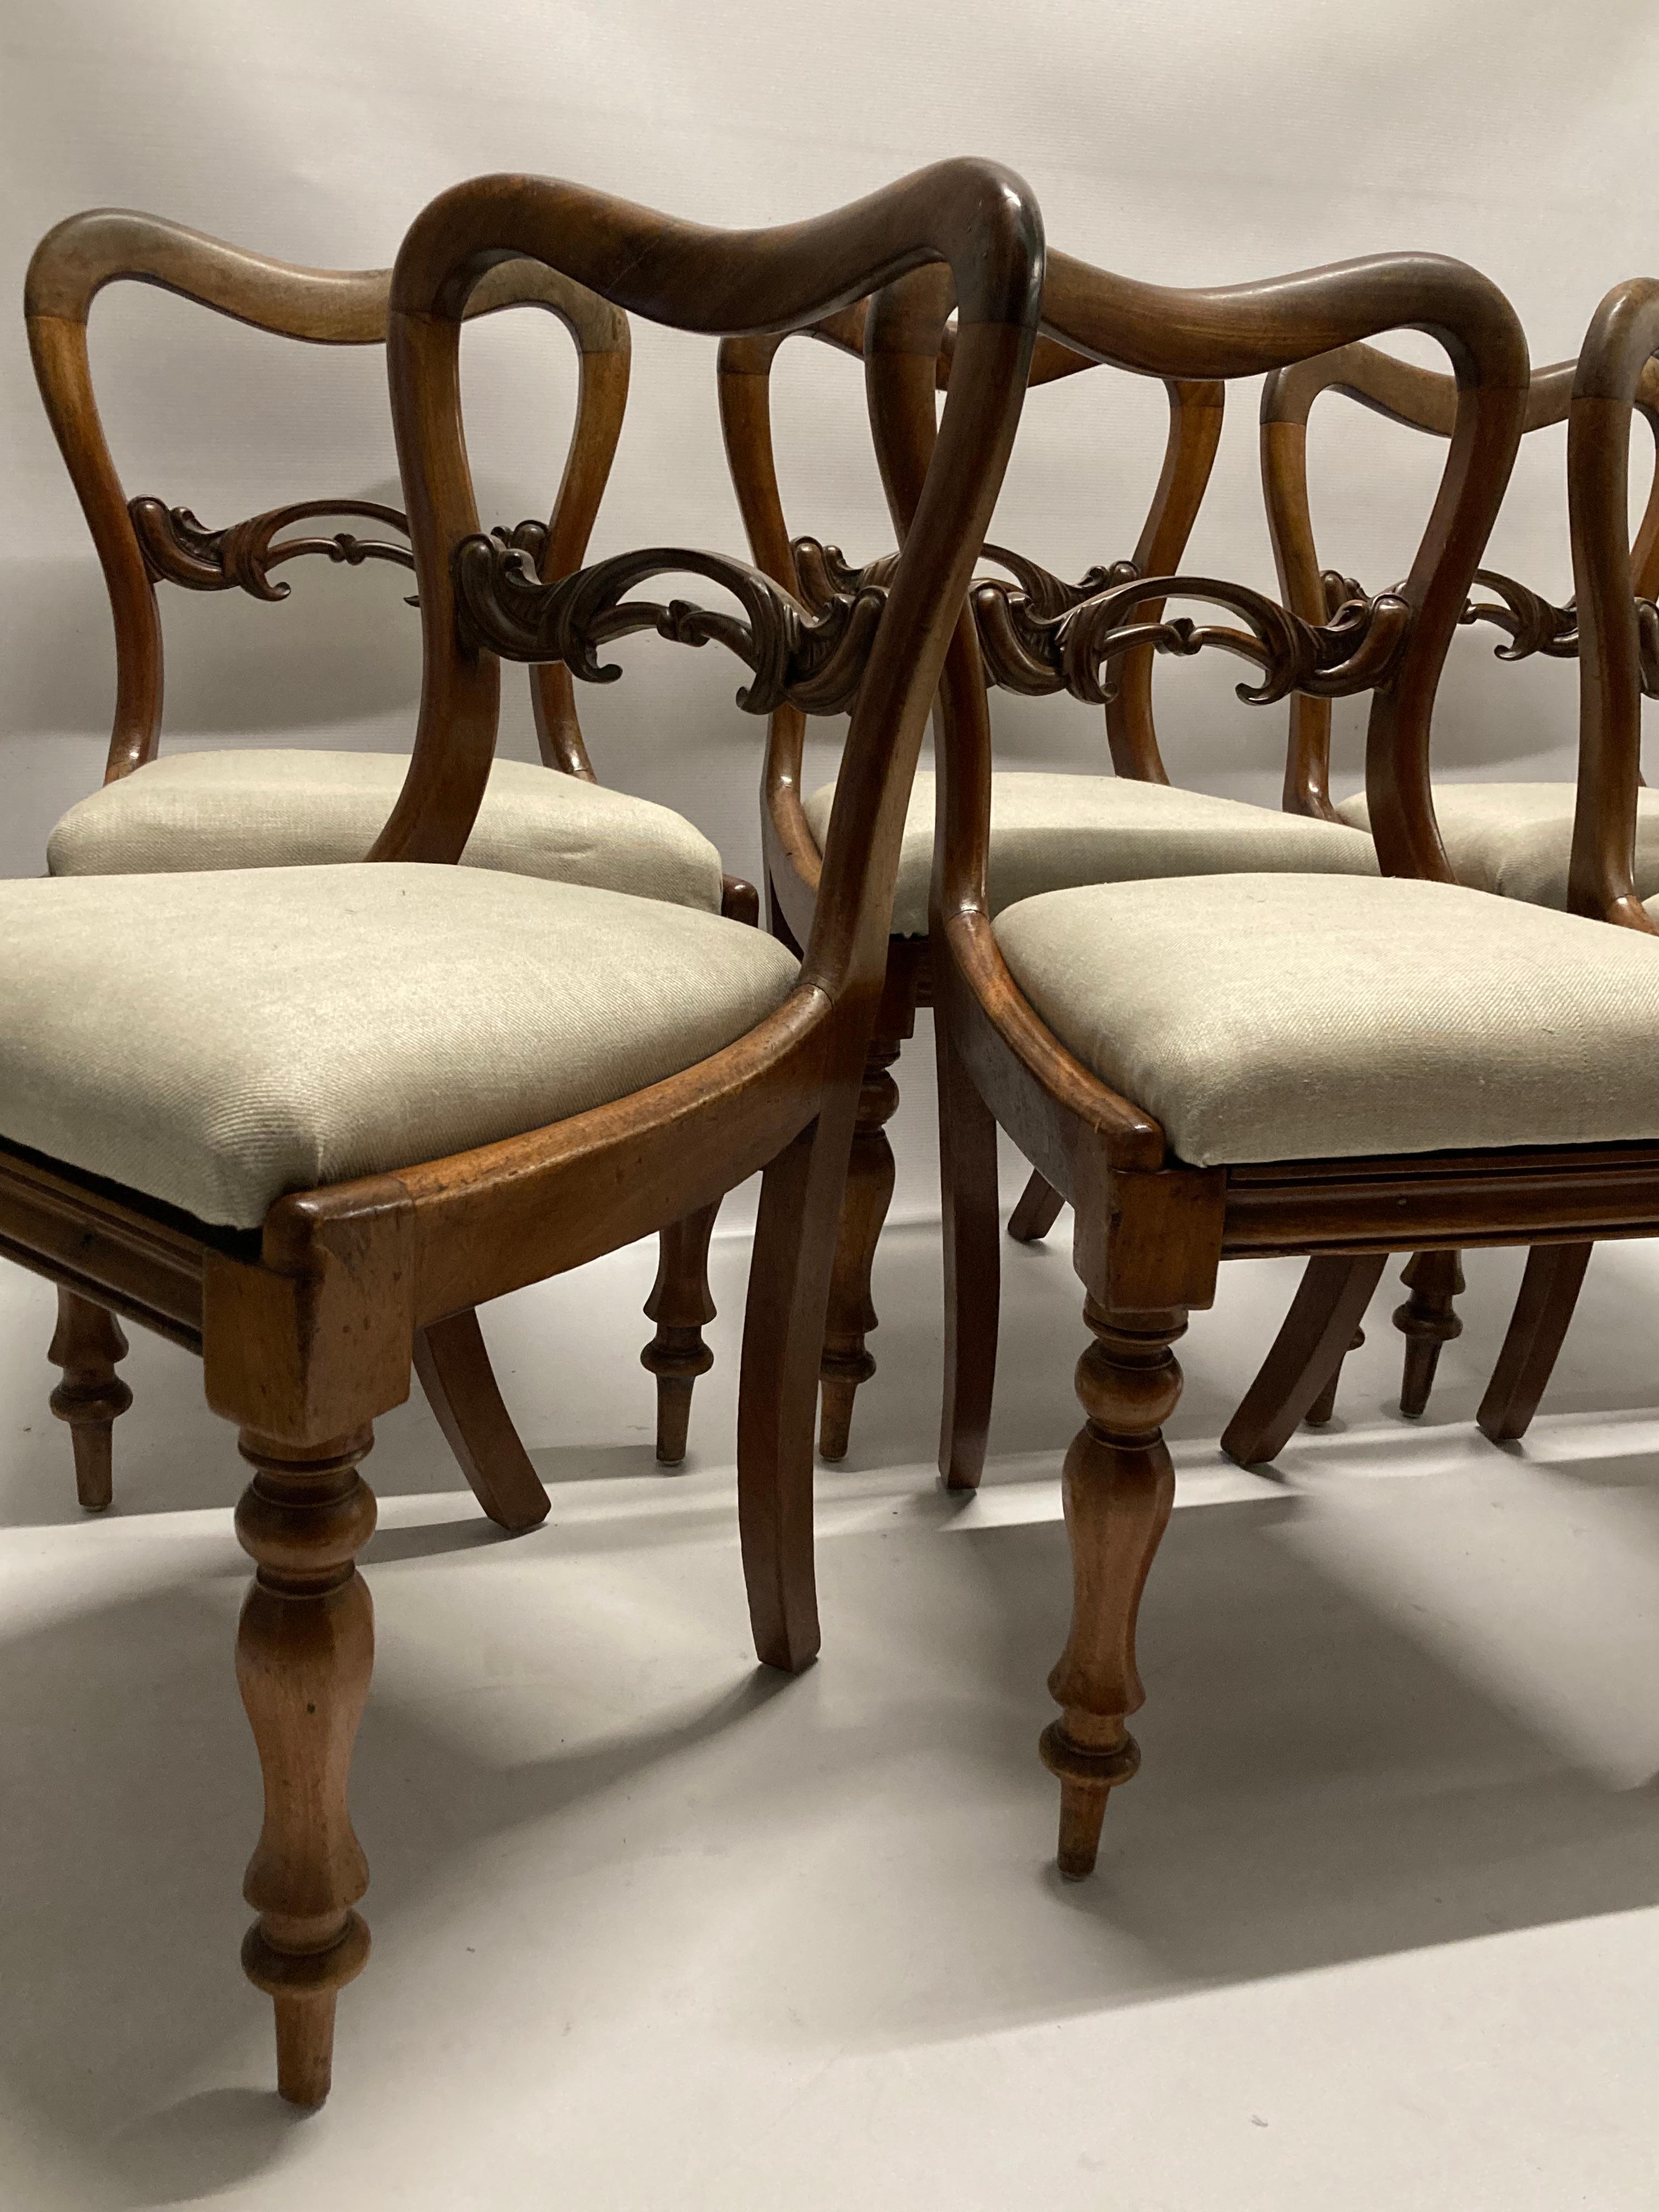 A good set of six Victorian Mahogany Balloon Back dining chairs attributed to Gillows of Lancaster & London

Turned legs and carved back rail.

The removable seats newly recovered in good quality light cream Anna French linen fabric.

In good